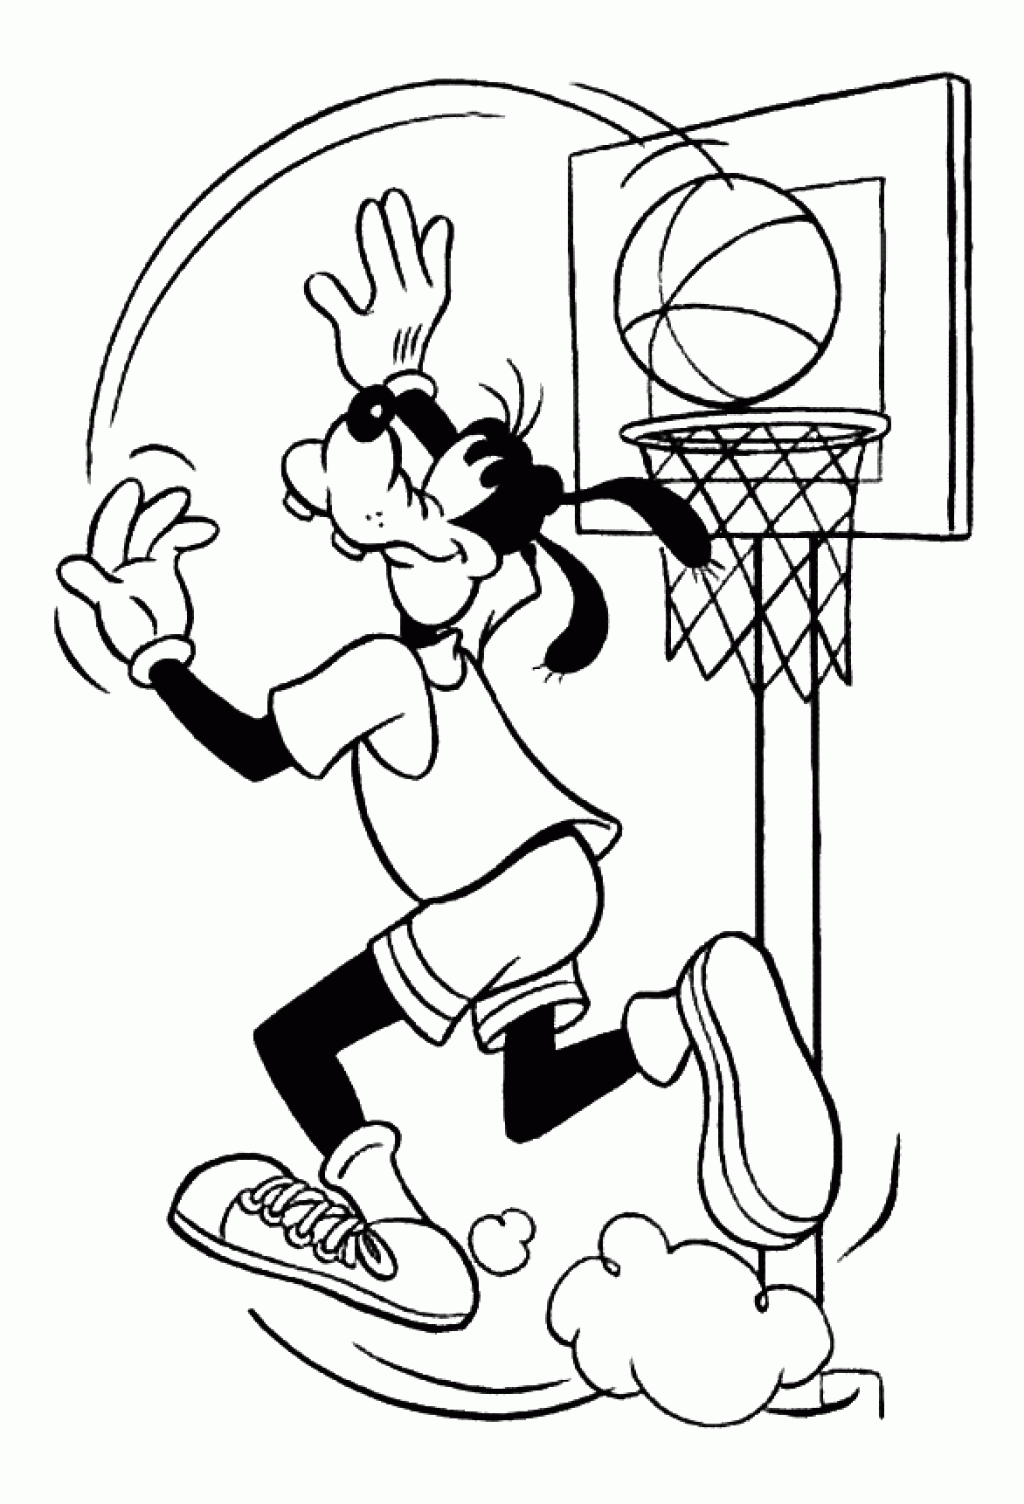 Disney Goofy Basketball Coloring Pages | Cartoon Coloring pages of ...